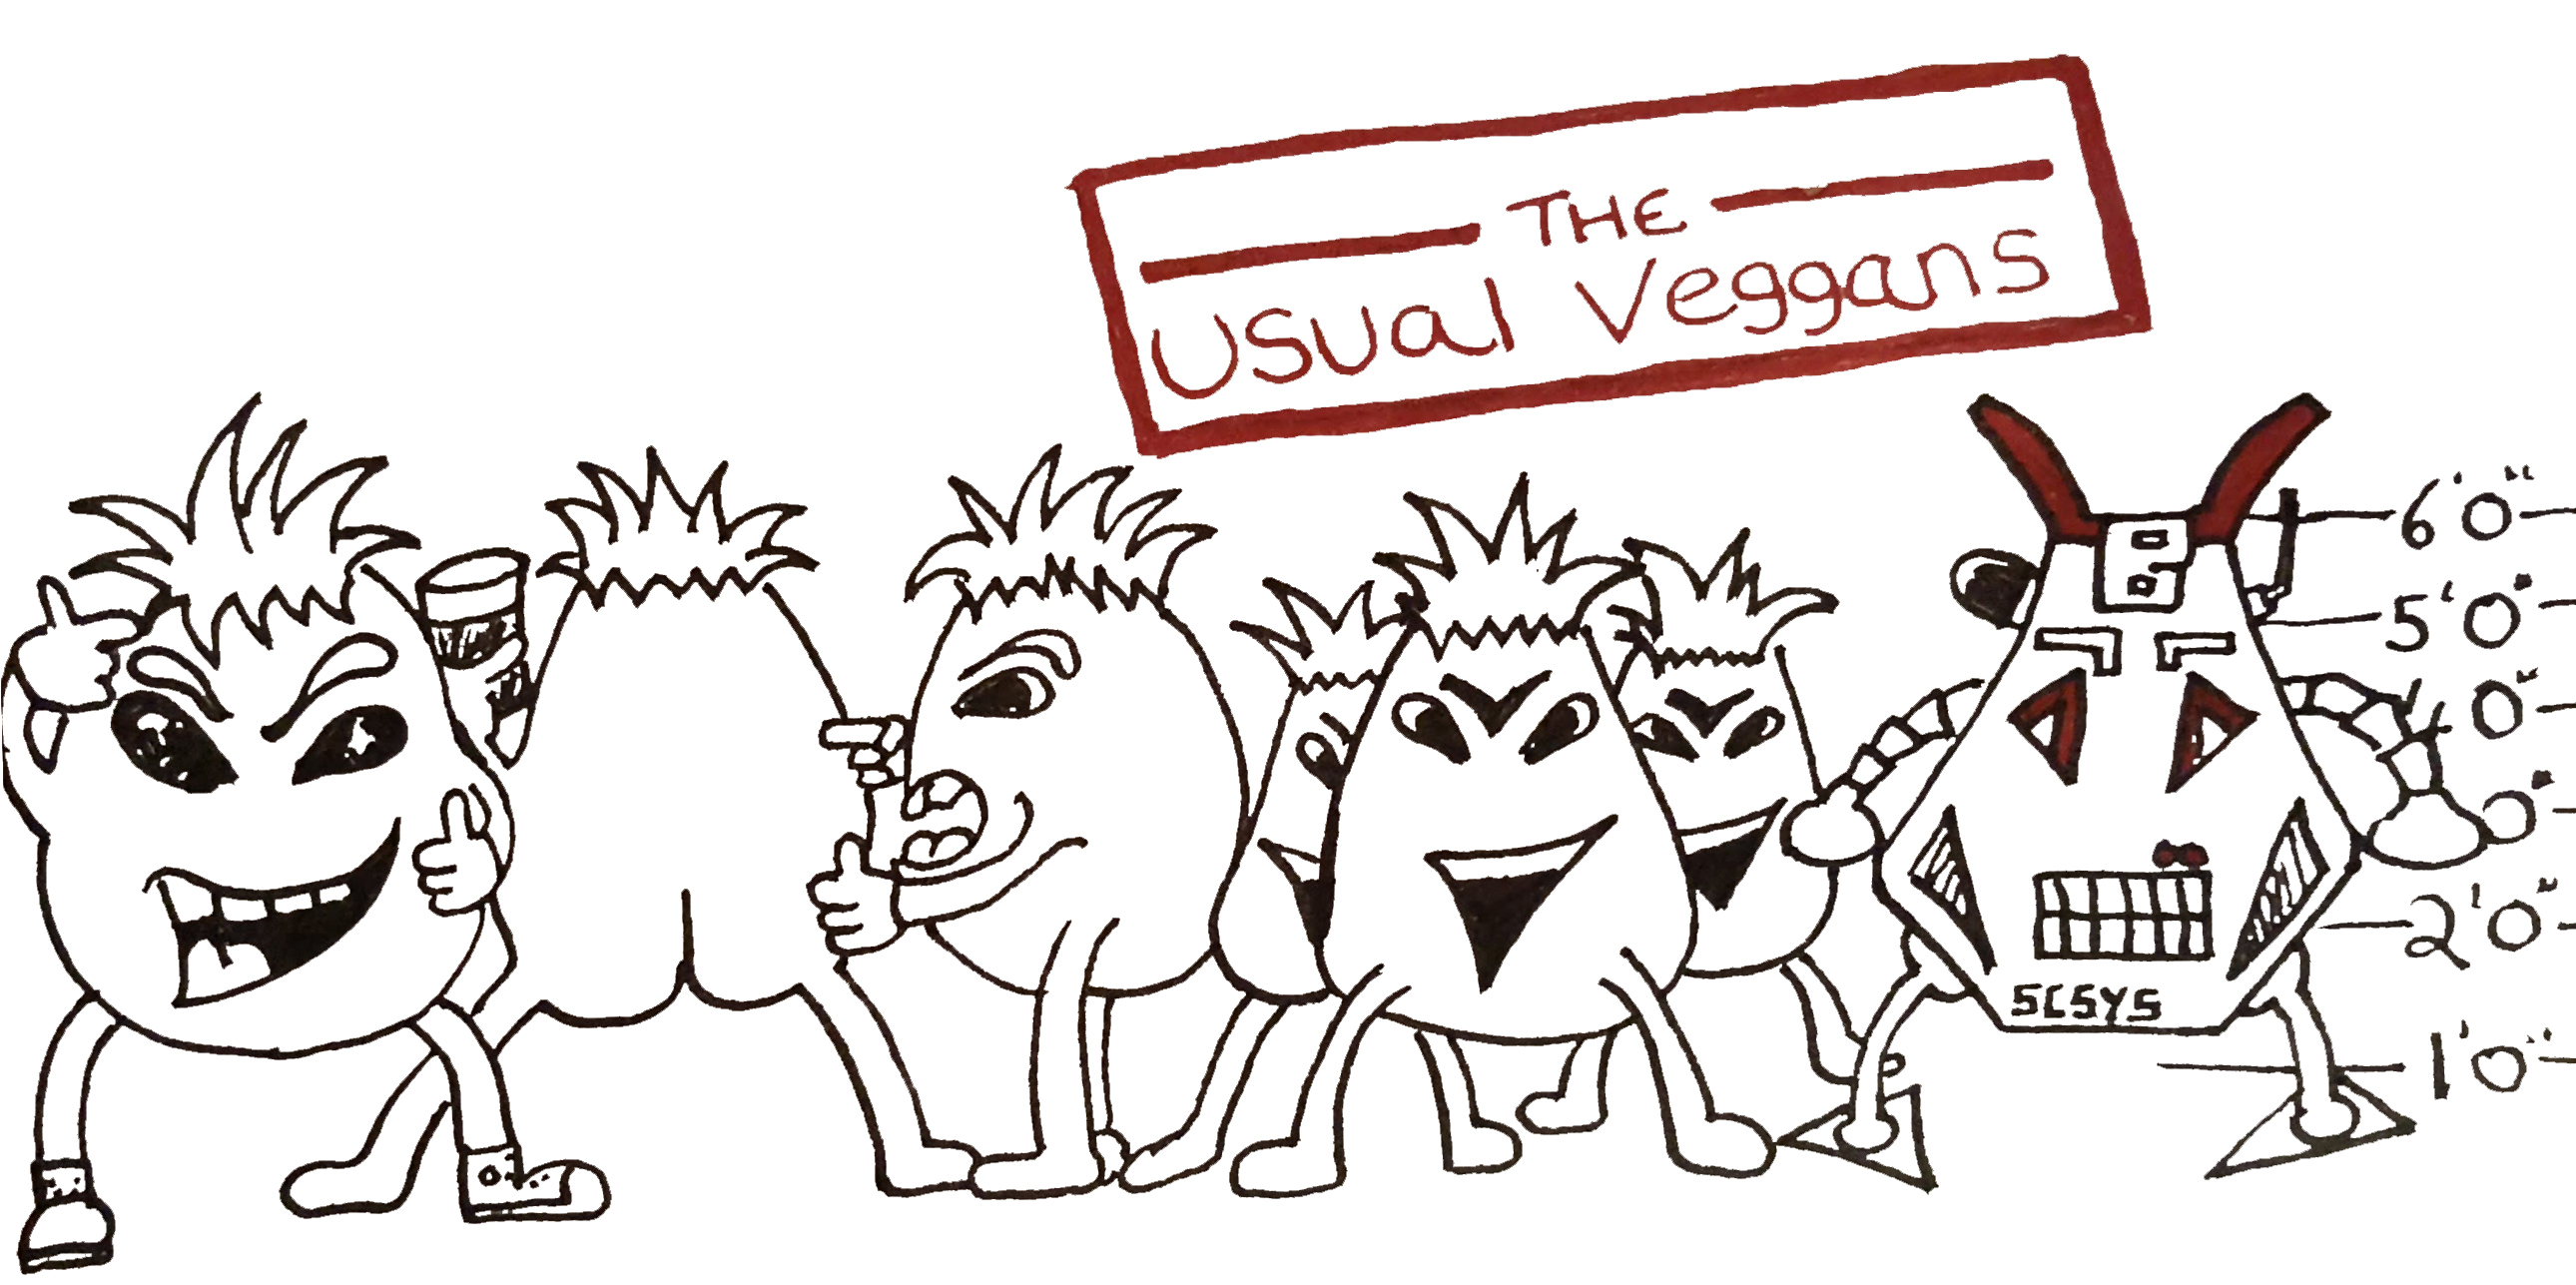 The line up of the usual words as Veggan characters